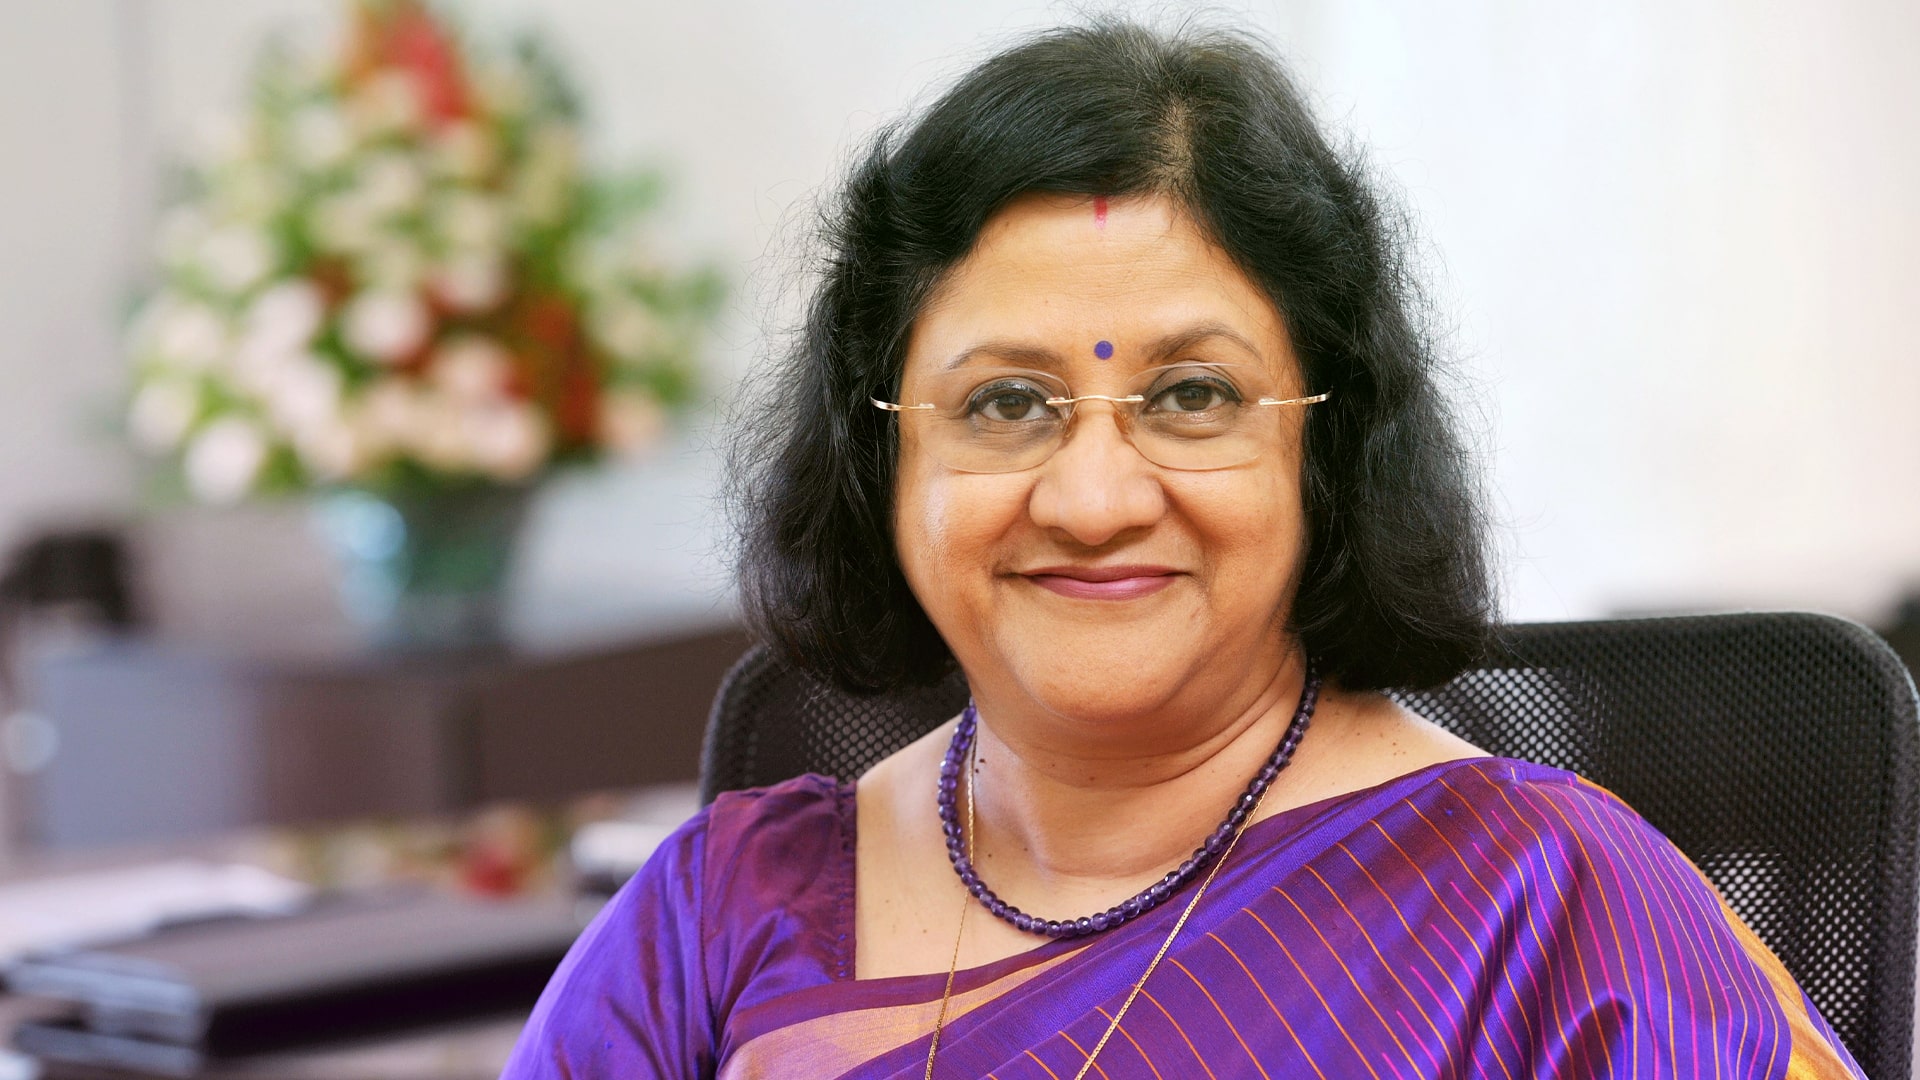 India doesn't need so many public sector banks, says former SBI chief